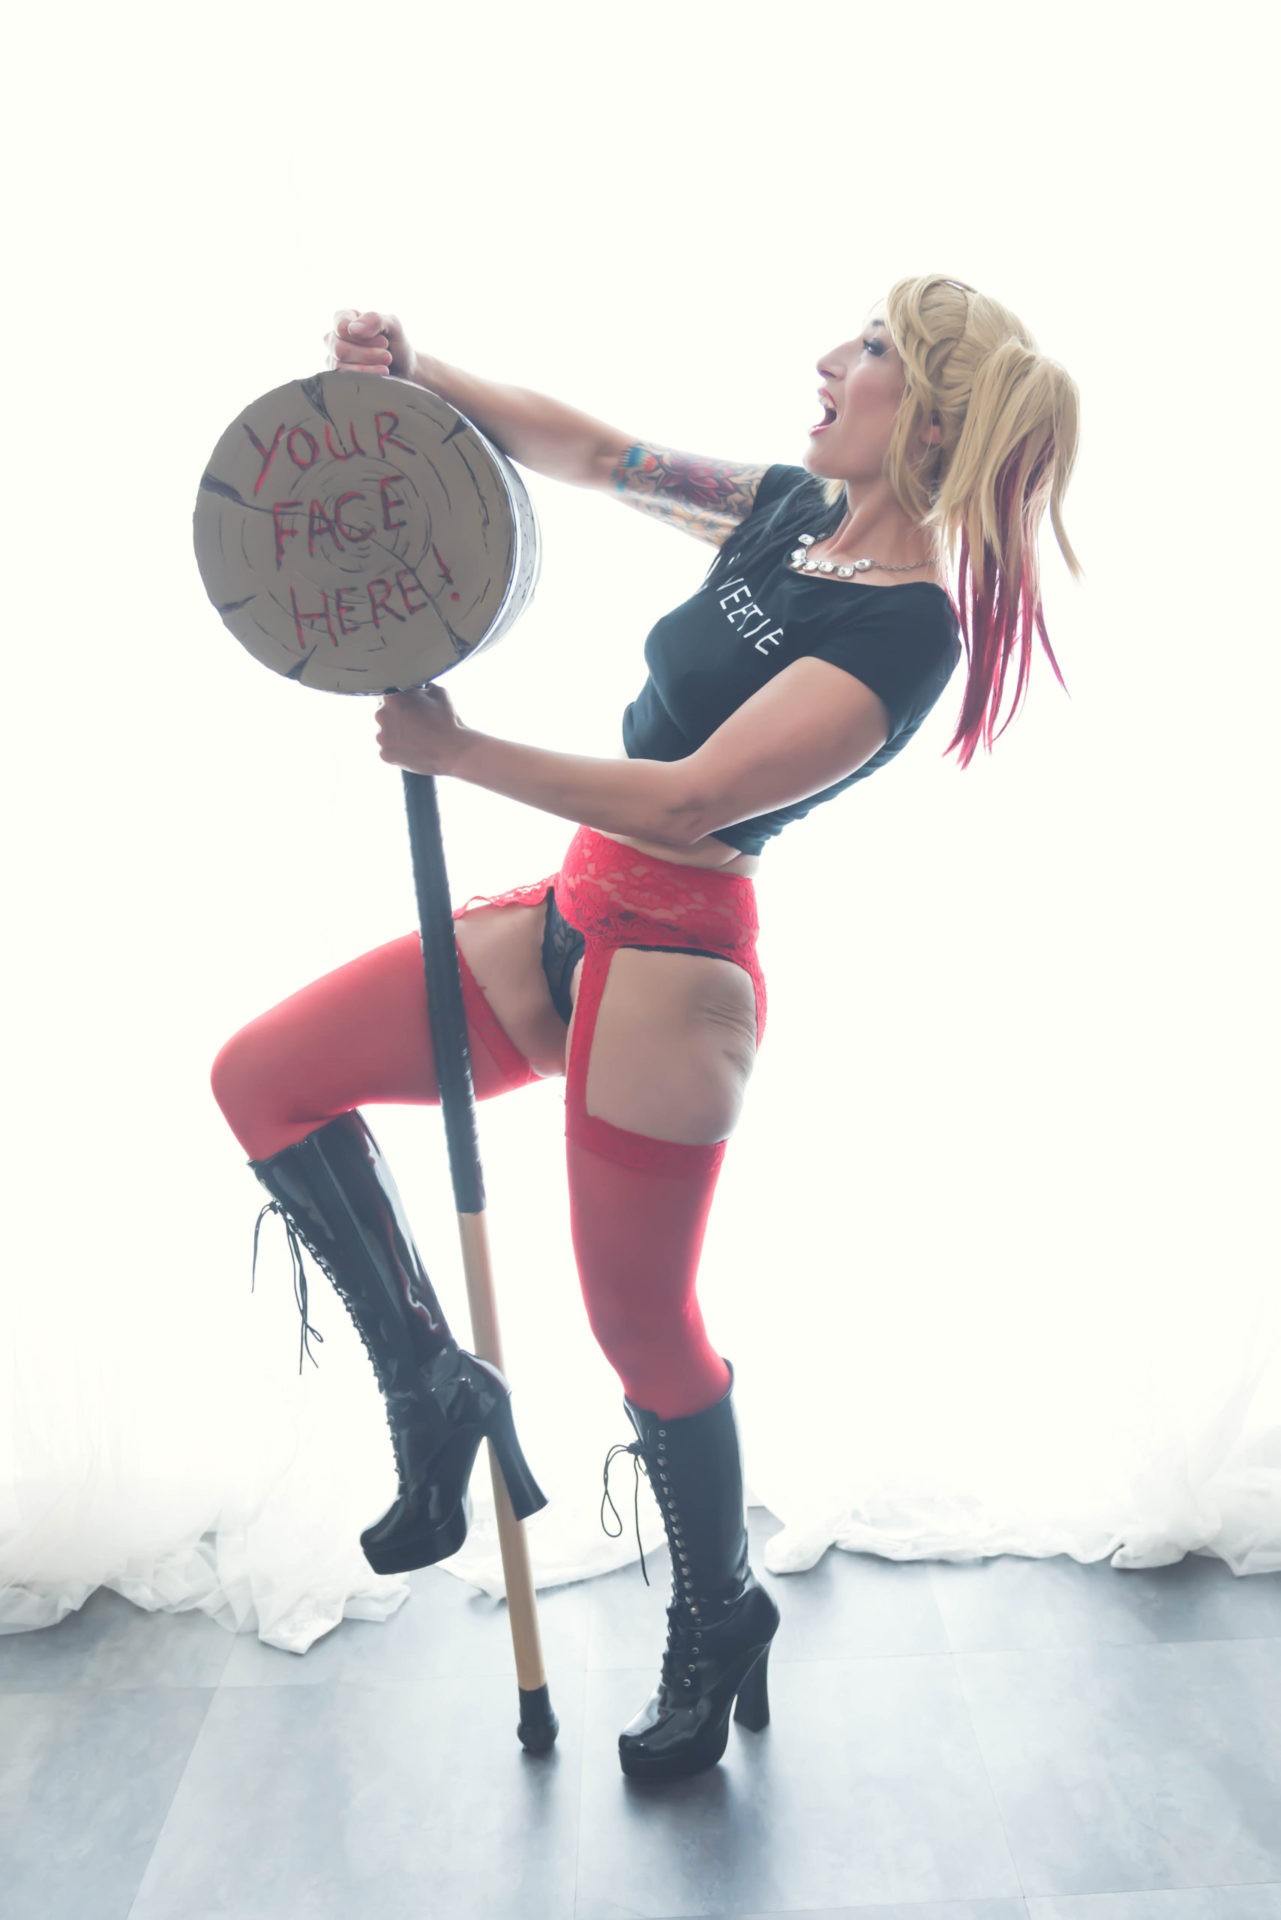 Harley with hammer